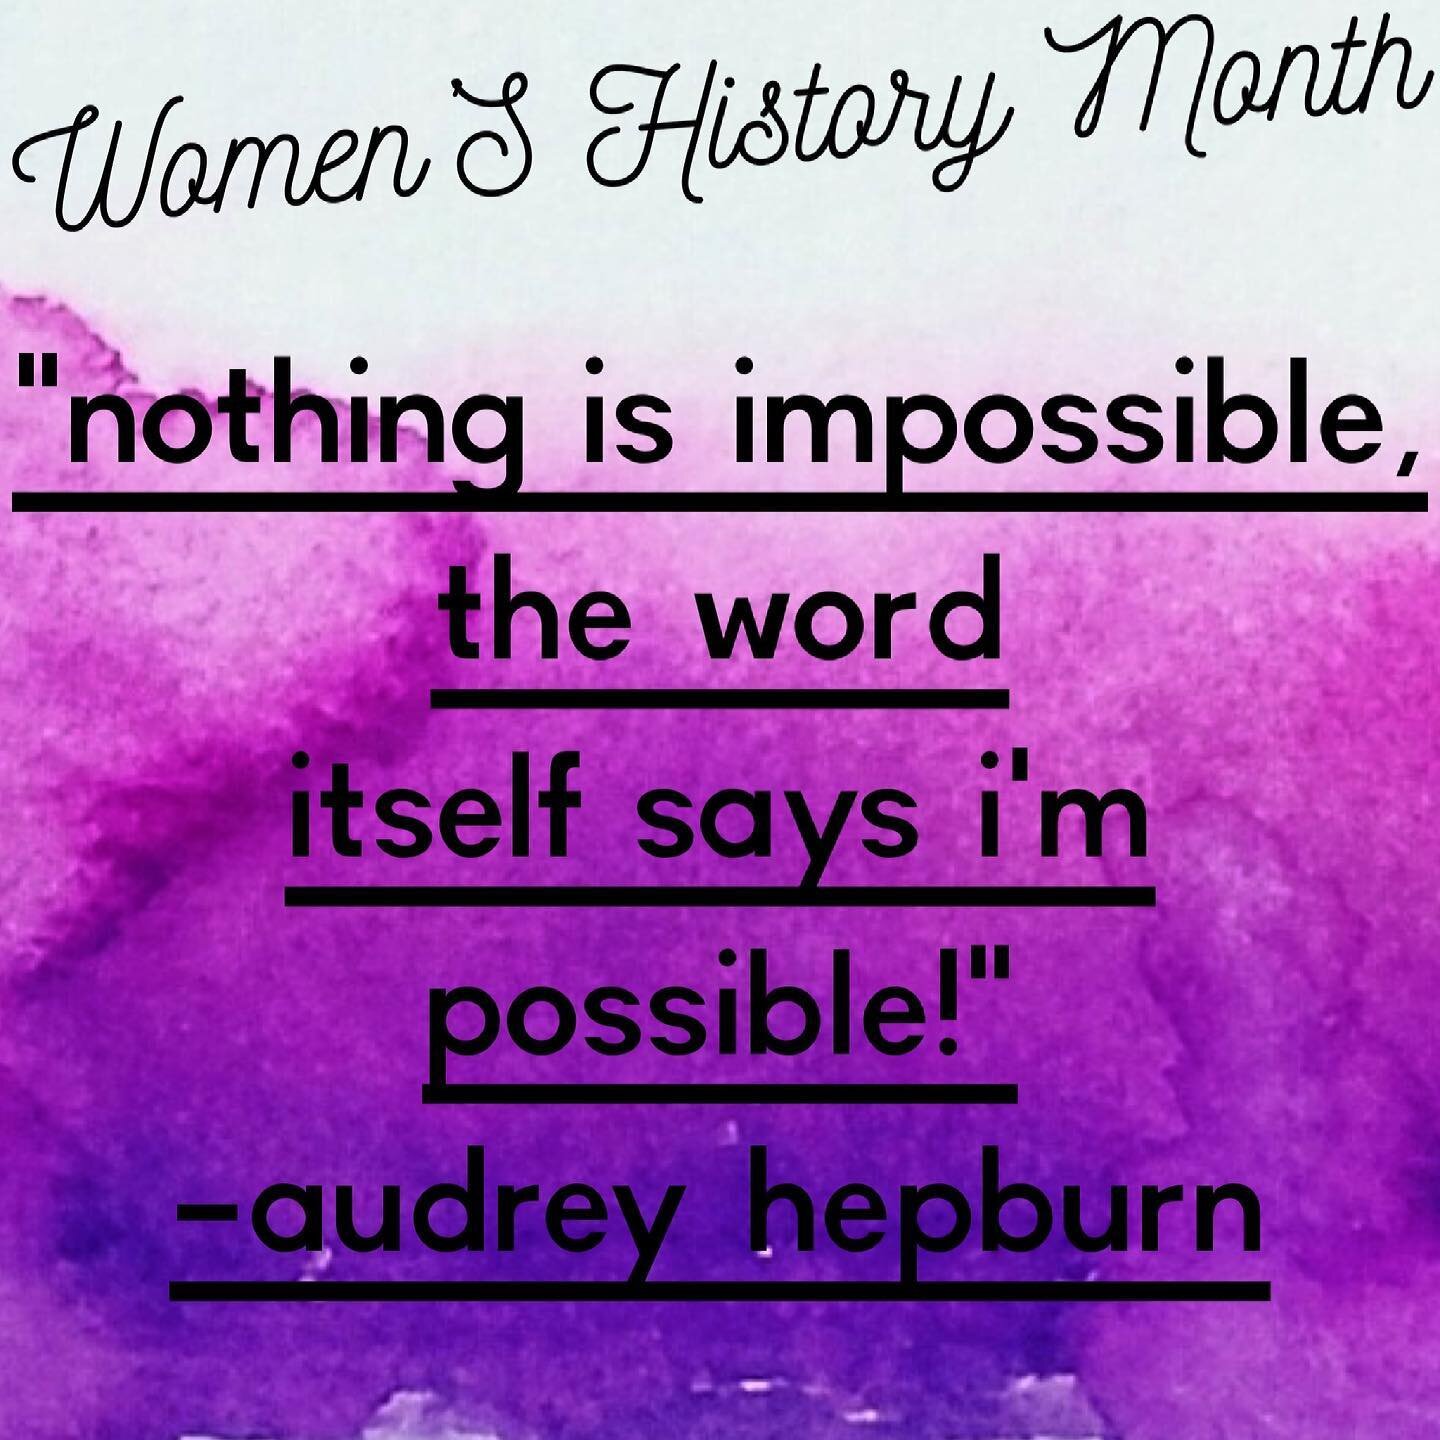 Last Tuesday of Women&rsquo;s History Month and who better than to celebrate an icon, one of the most feminine, yet hard working women in &lsquo;Hollywood&rsquo; Audrey Hepburn was a force to be reckoned with.
💜
As famous as she was she also had an 